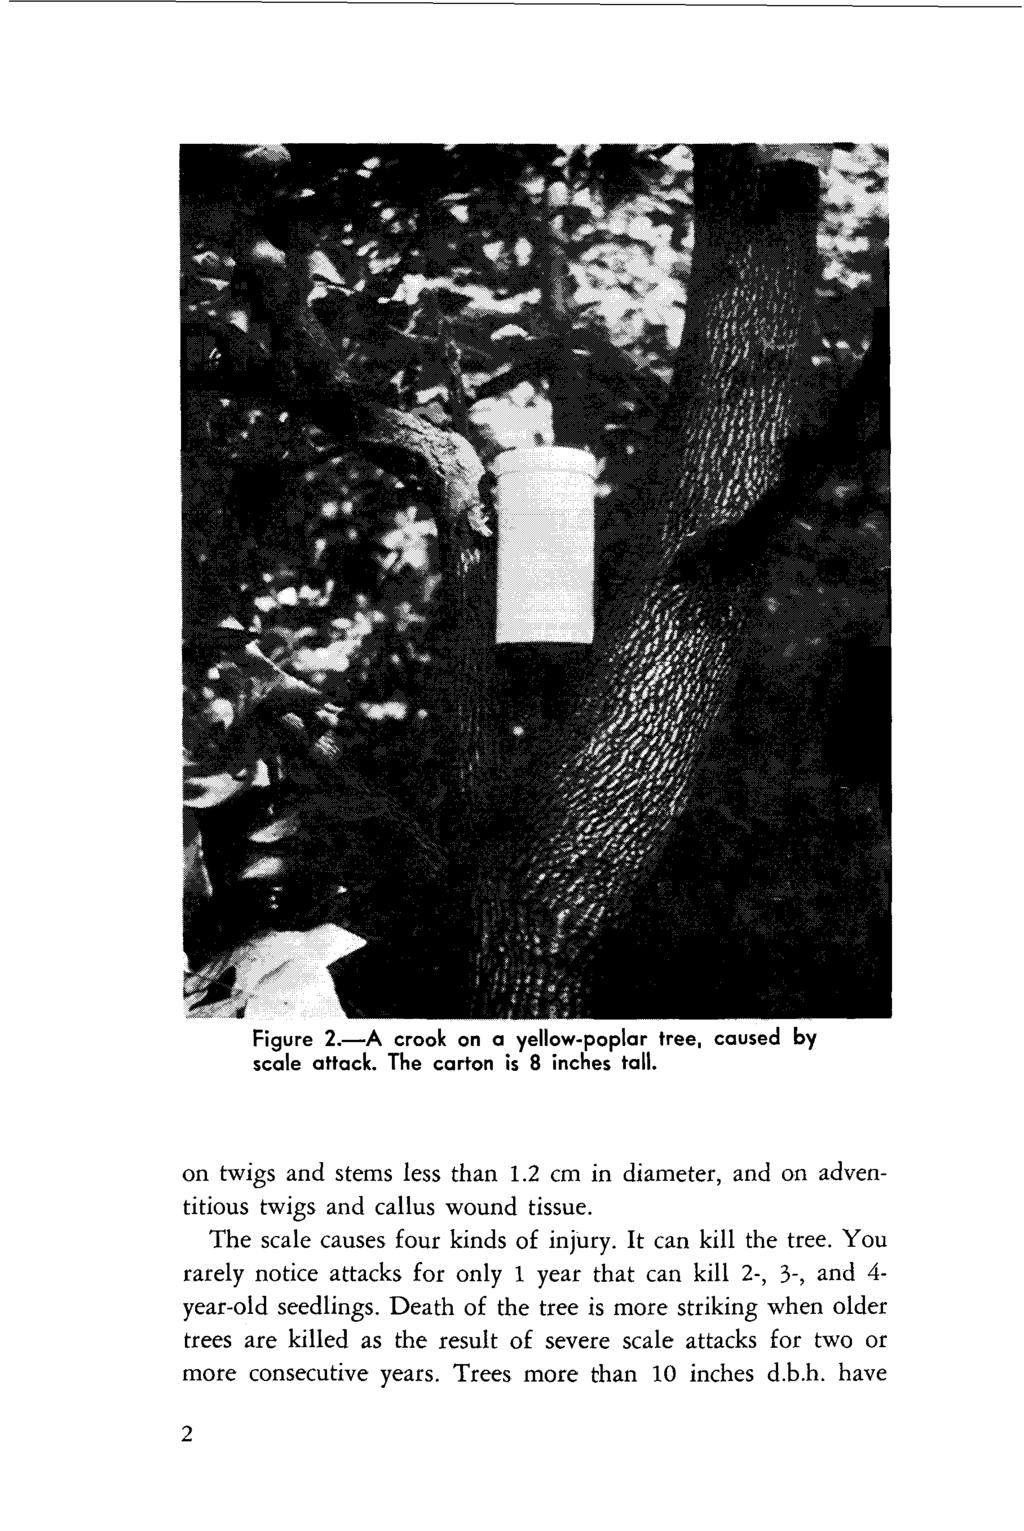 Figure 2.-A crook on a yellow-poplar tree, caused by scale attack. The carton is 8 inches tall. on twigs and stems less than 1.2 cm in diameter, and on adventitious twigs and callus wound tissue.